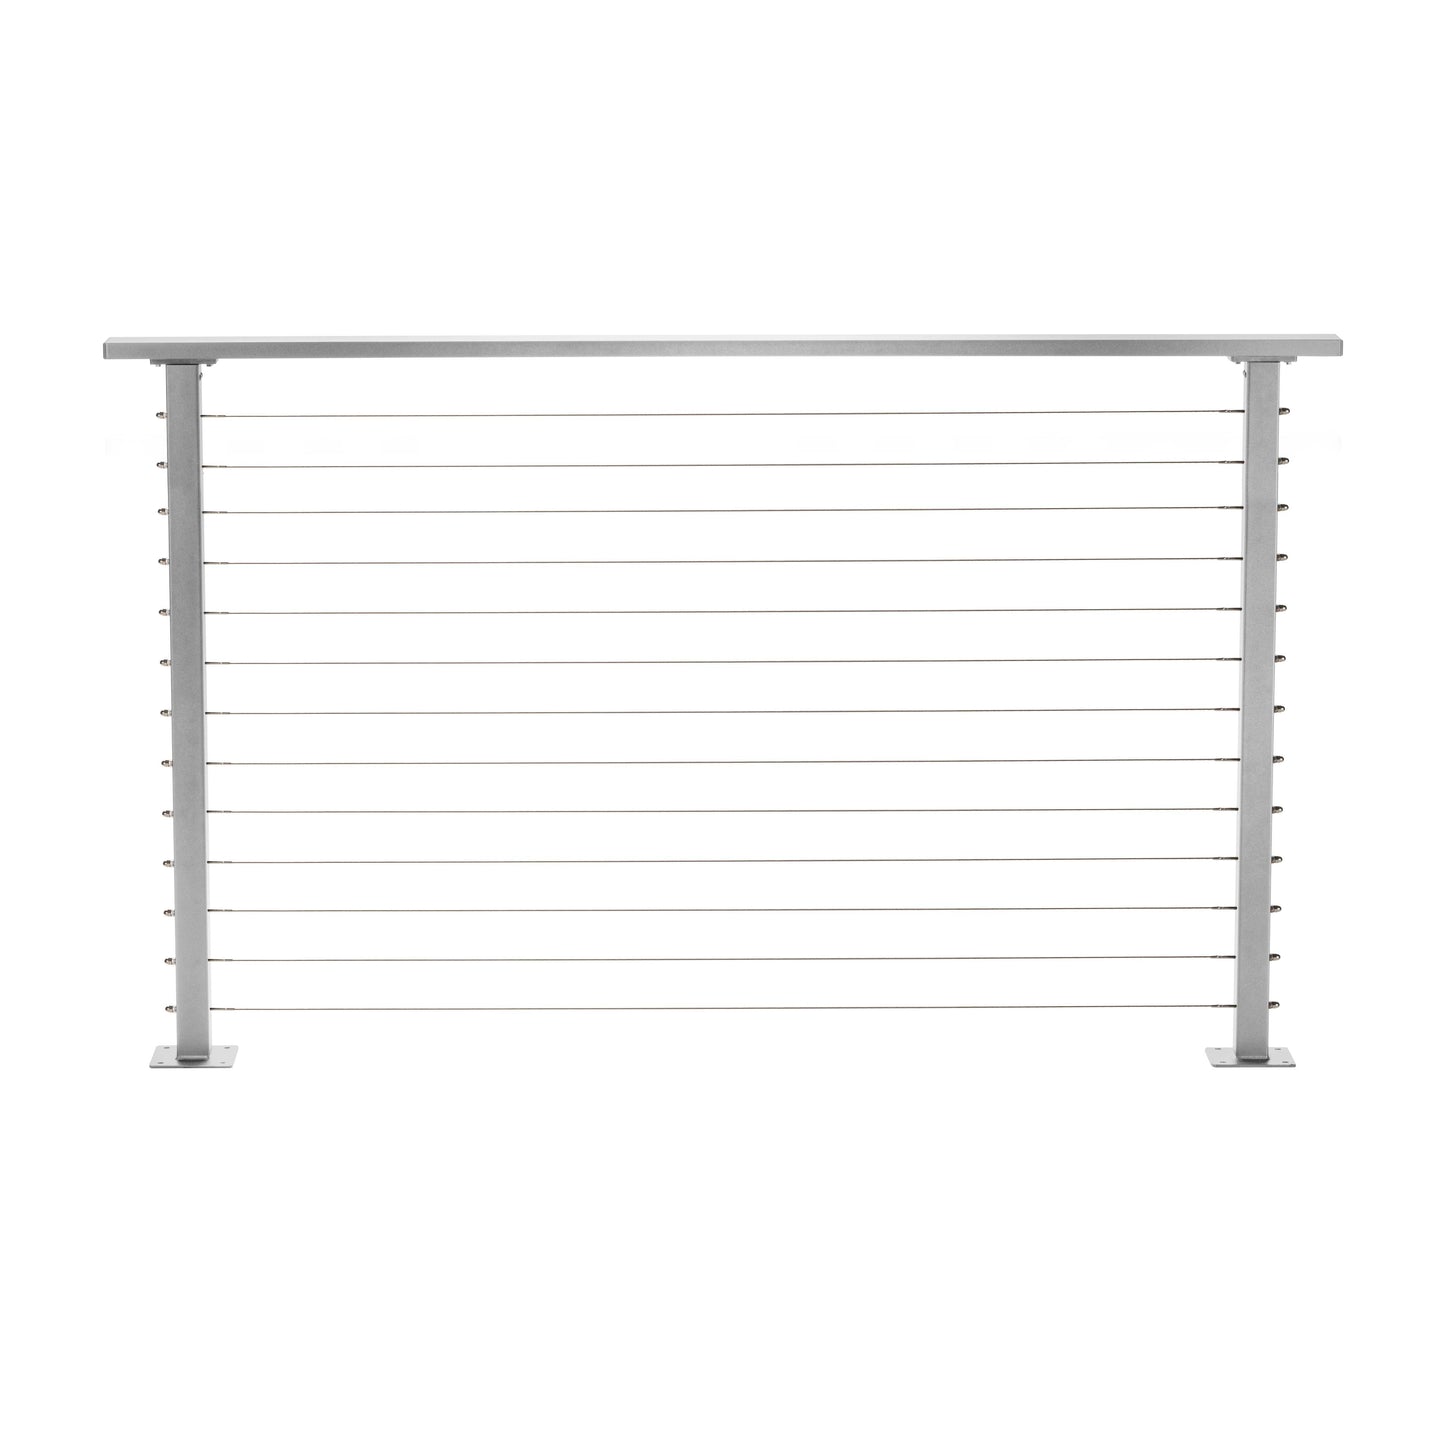 4 ft. Grey Deck Cable Railing